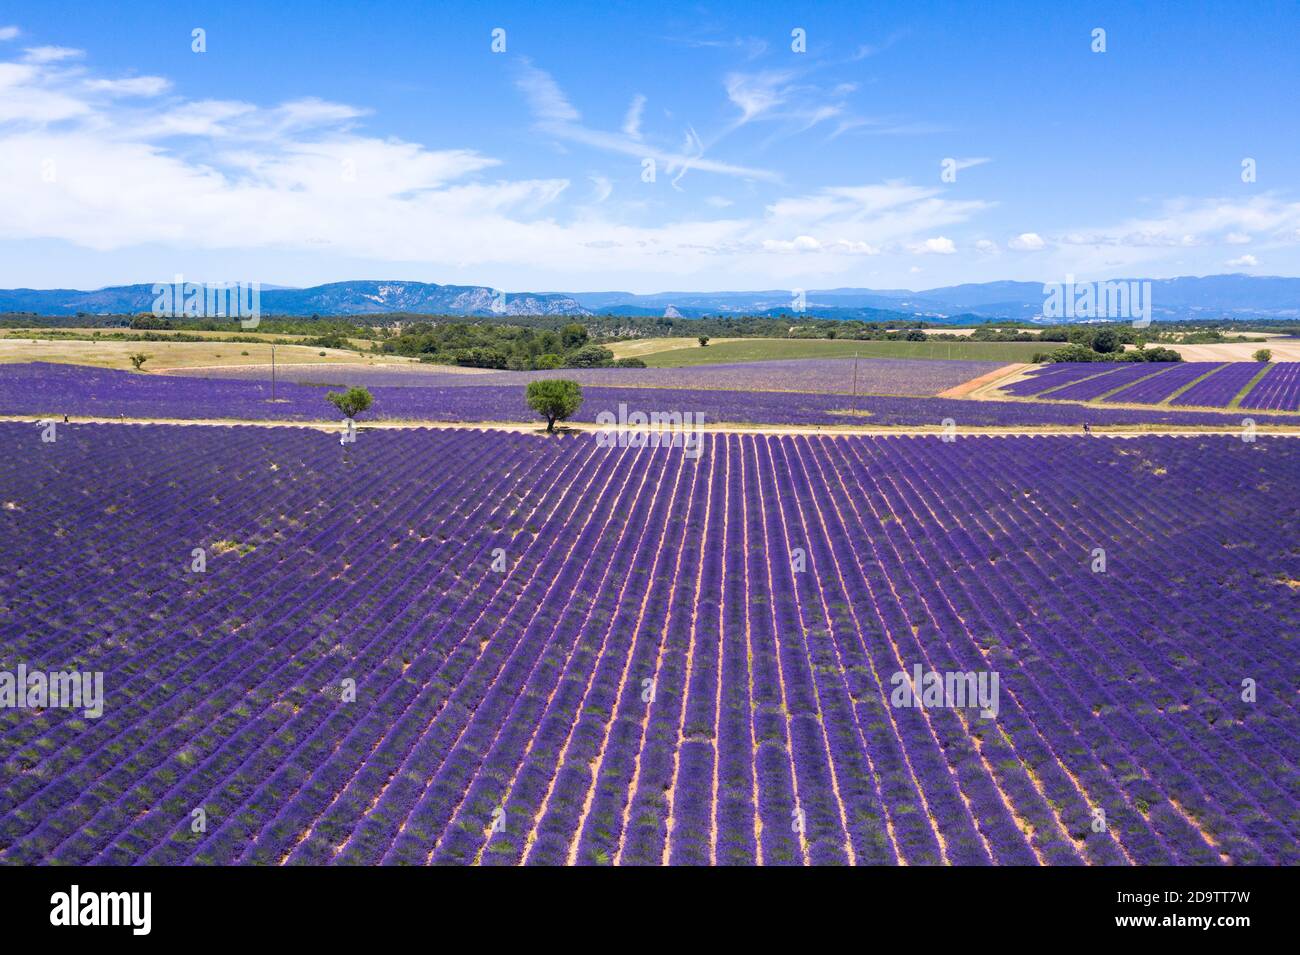 Aerial view of lavender fields in Valensole in South of France Stock Photo